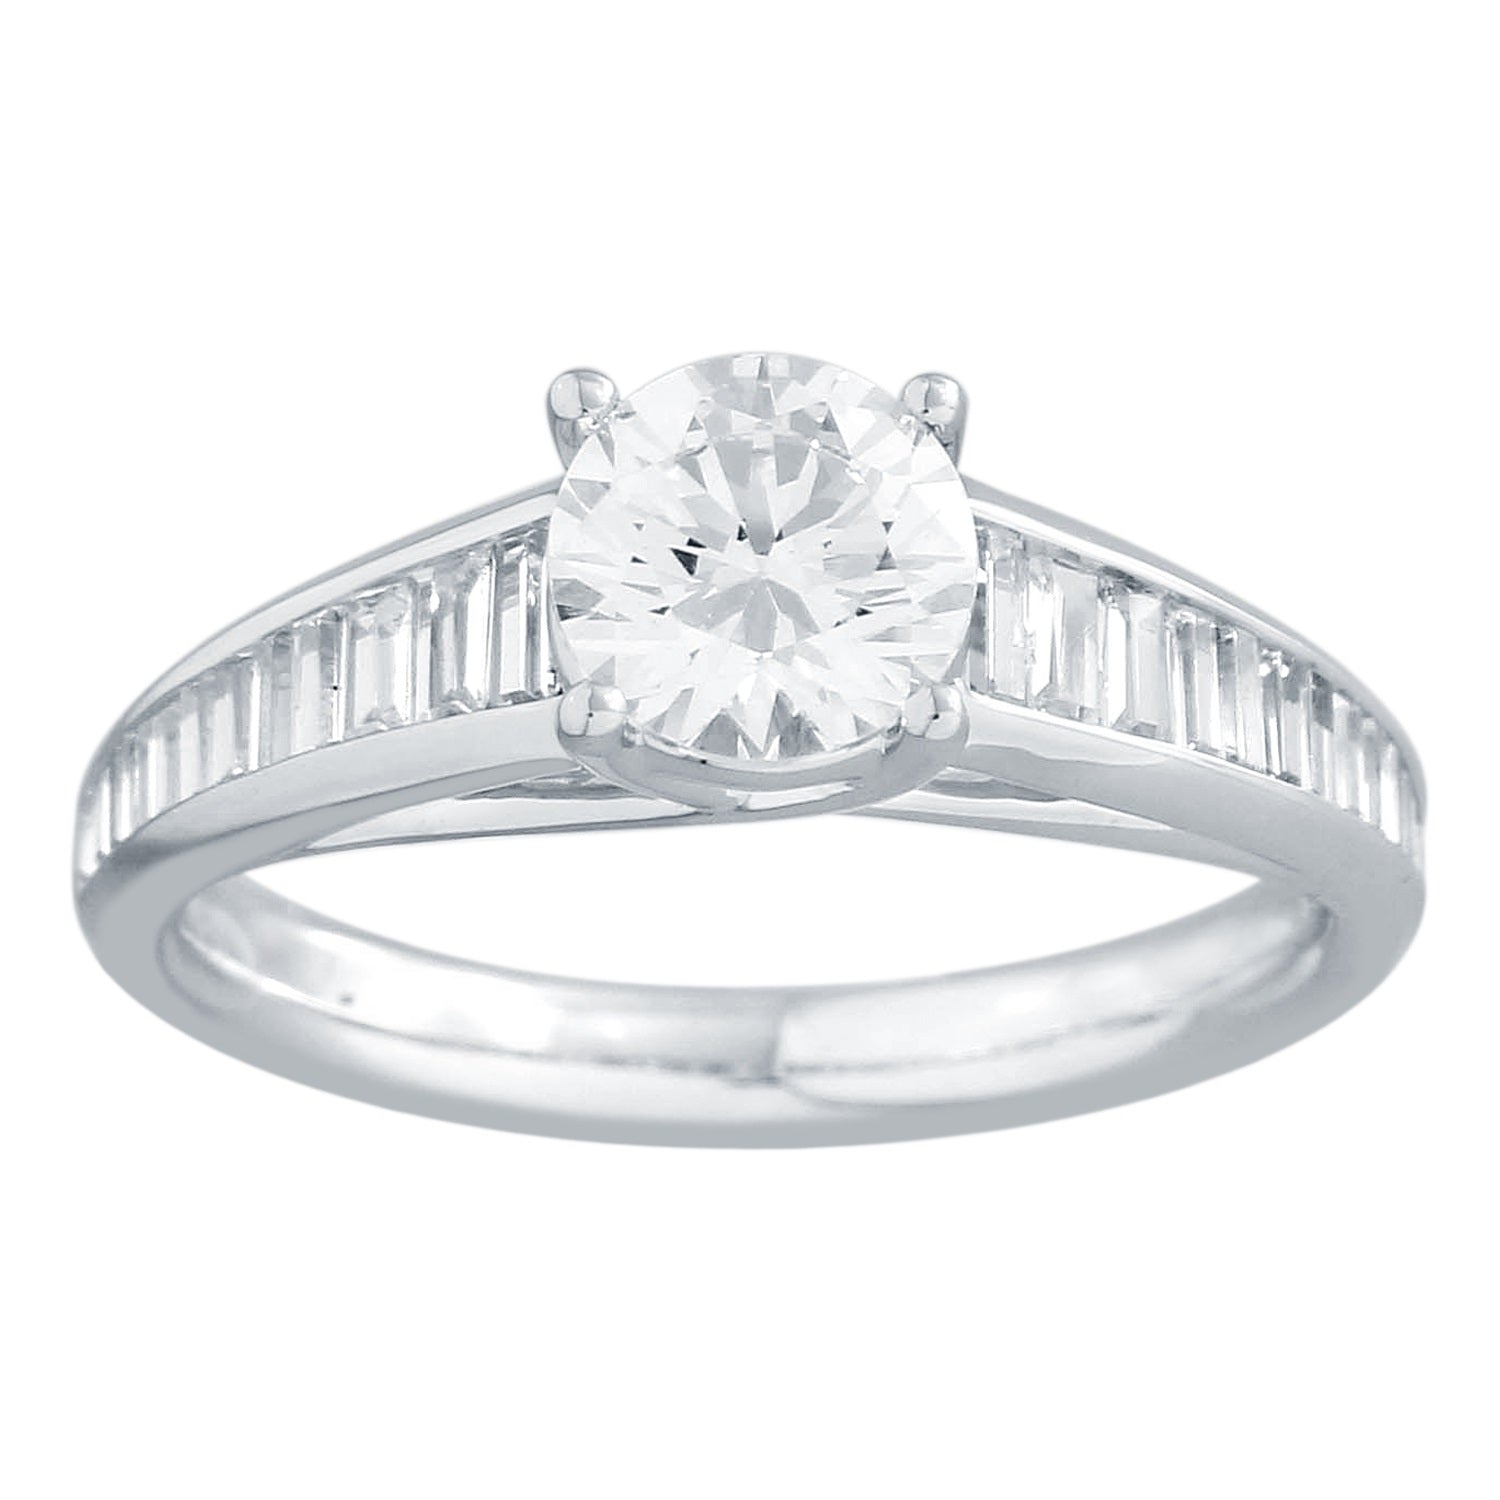 Baguette Semi Mount Engagement Ring made in 14k White gold